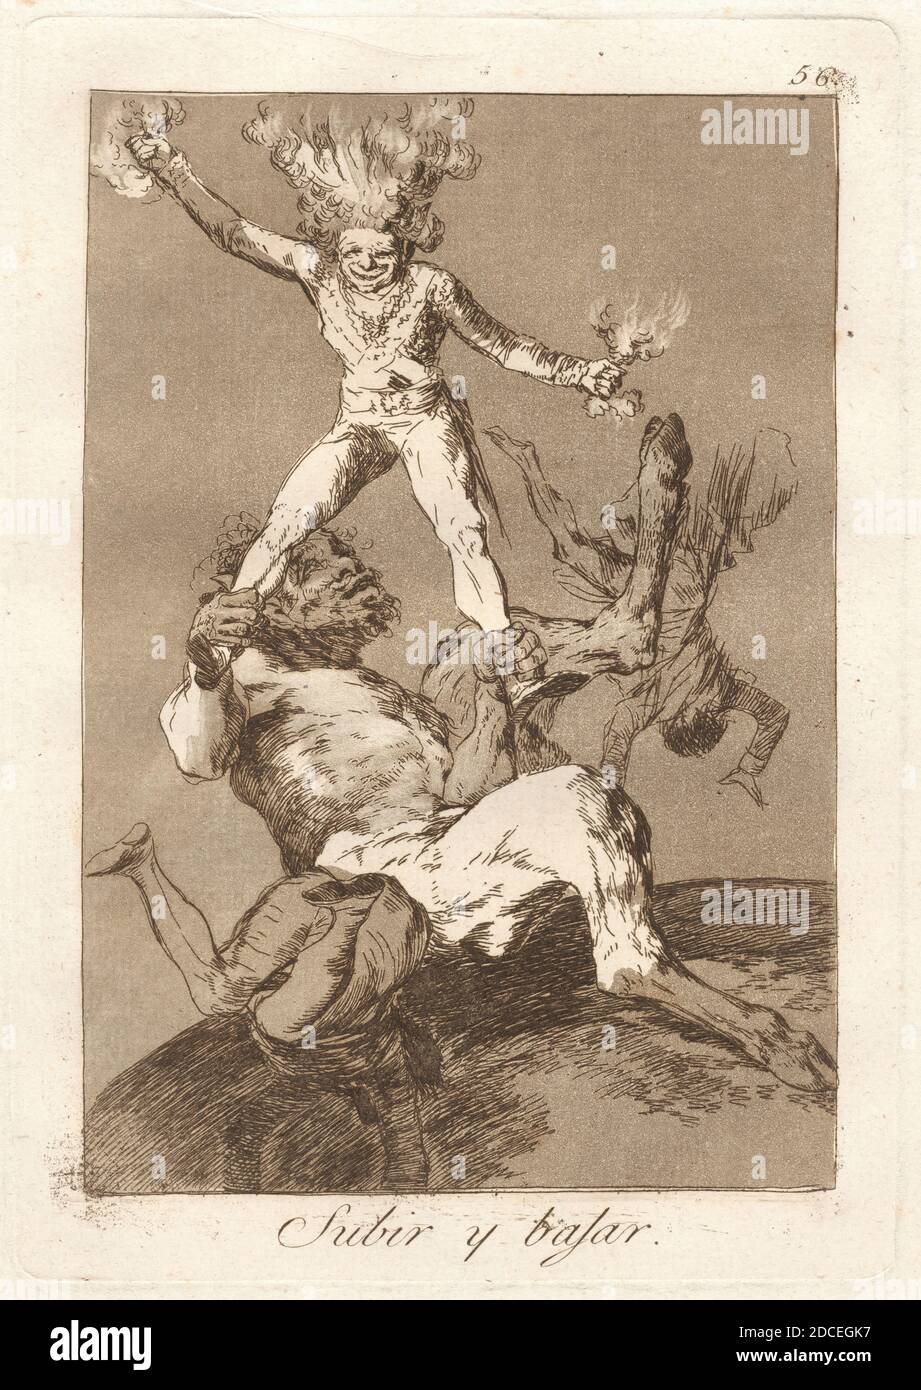 Francisco de Goya, (artist), Spanish, 1746 - 1828, Subir y bajar (To Rise and To Fall), Los Caprichos (plate 56), (series), published 1799, etching and burnished aquatint on laid paper, plate: 21.5 x 15.2 cm (8 7/16 x 6 in.), sheet: 27.6 x 19.1 cm (10 7/8 x 7 1/2 in Stock Photo